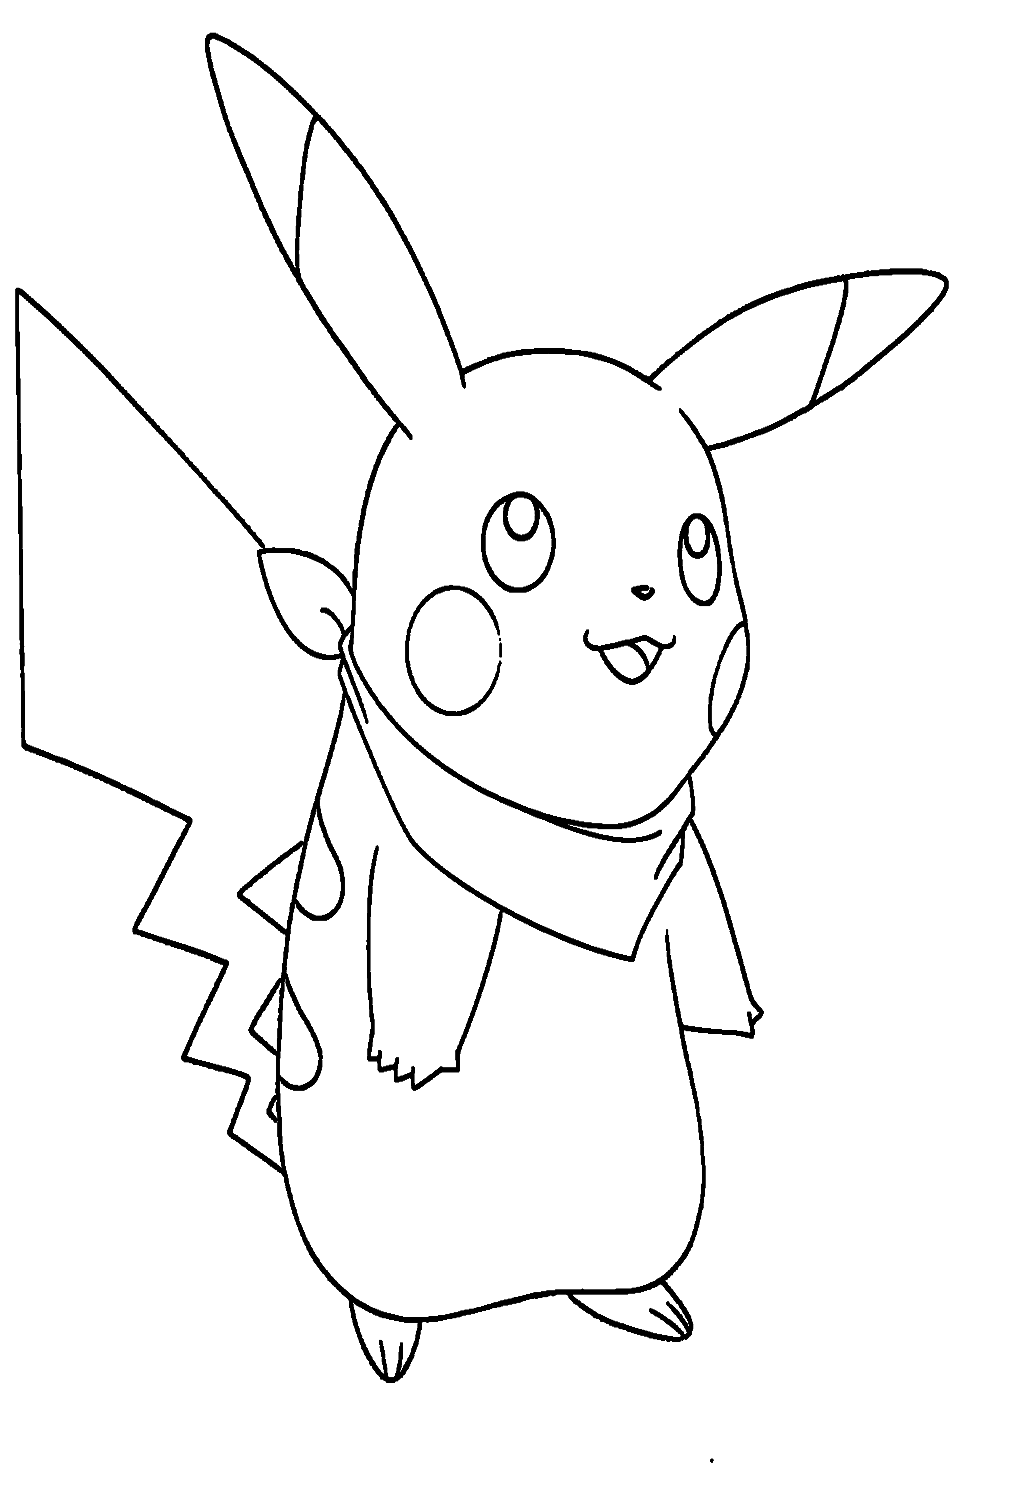 Pikachu Wearing A Scarf Coloring Pages